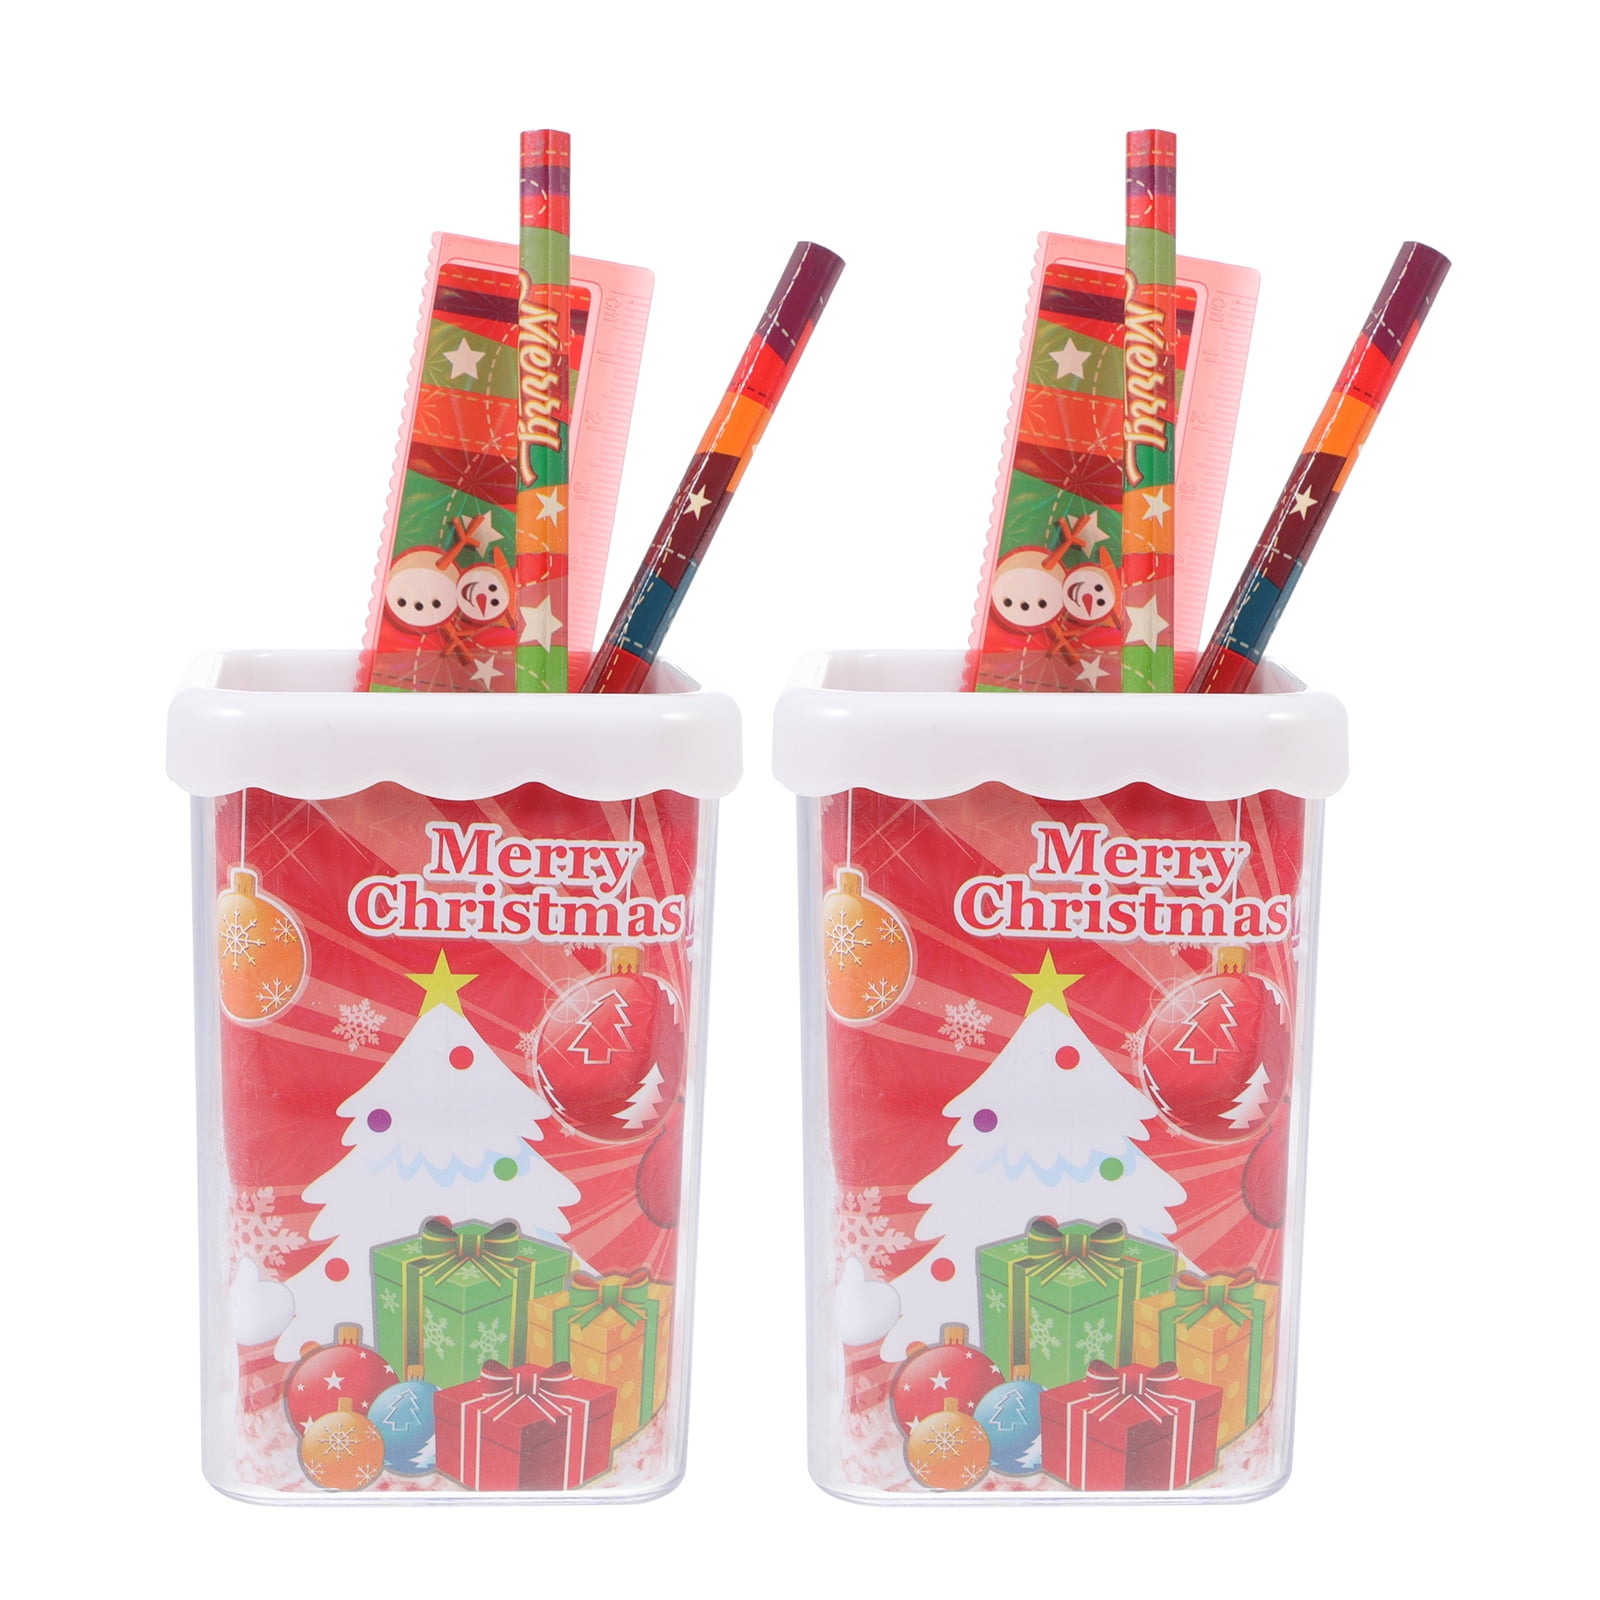 Kids LED Pencils & Color Gift set Writing School Supplies Party Fun Favors  Toys